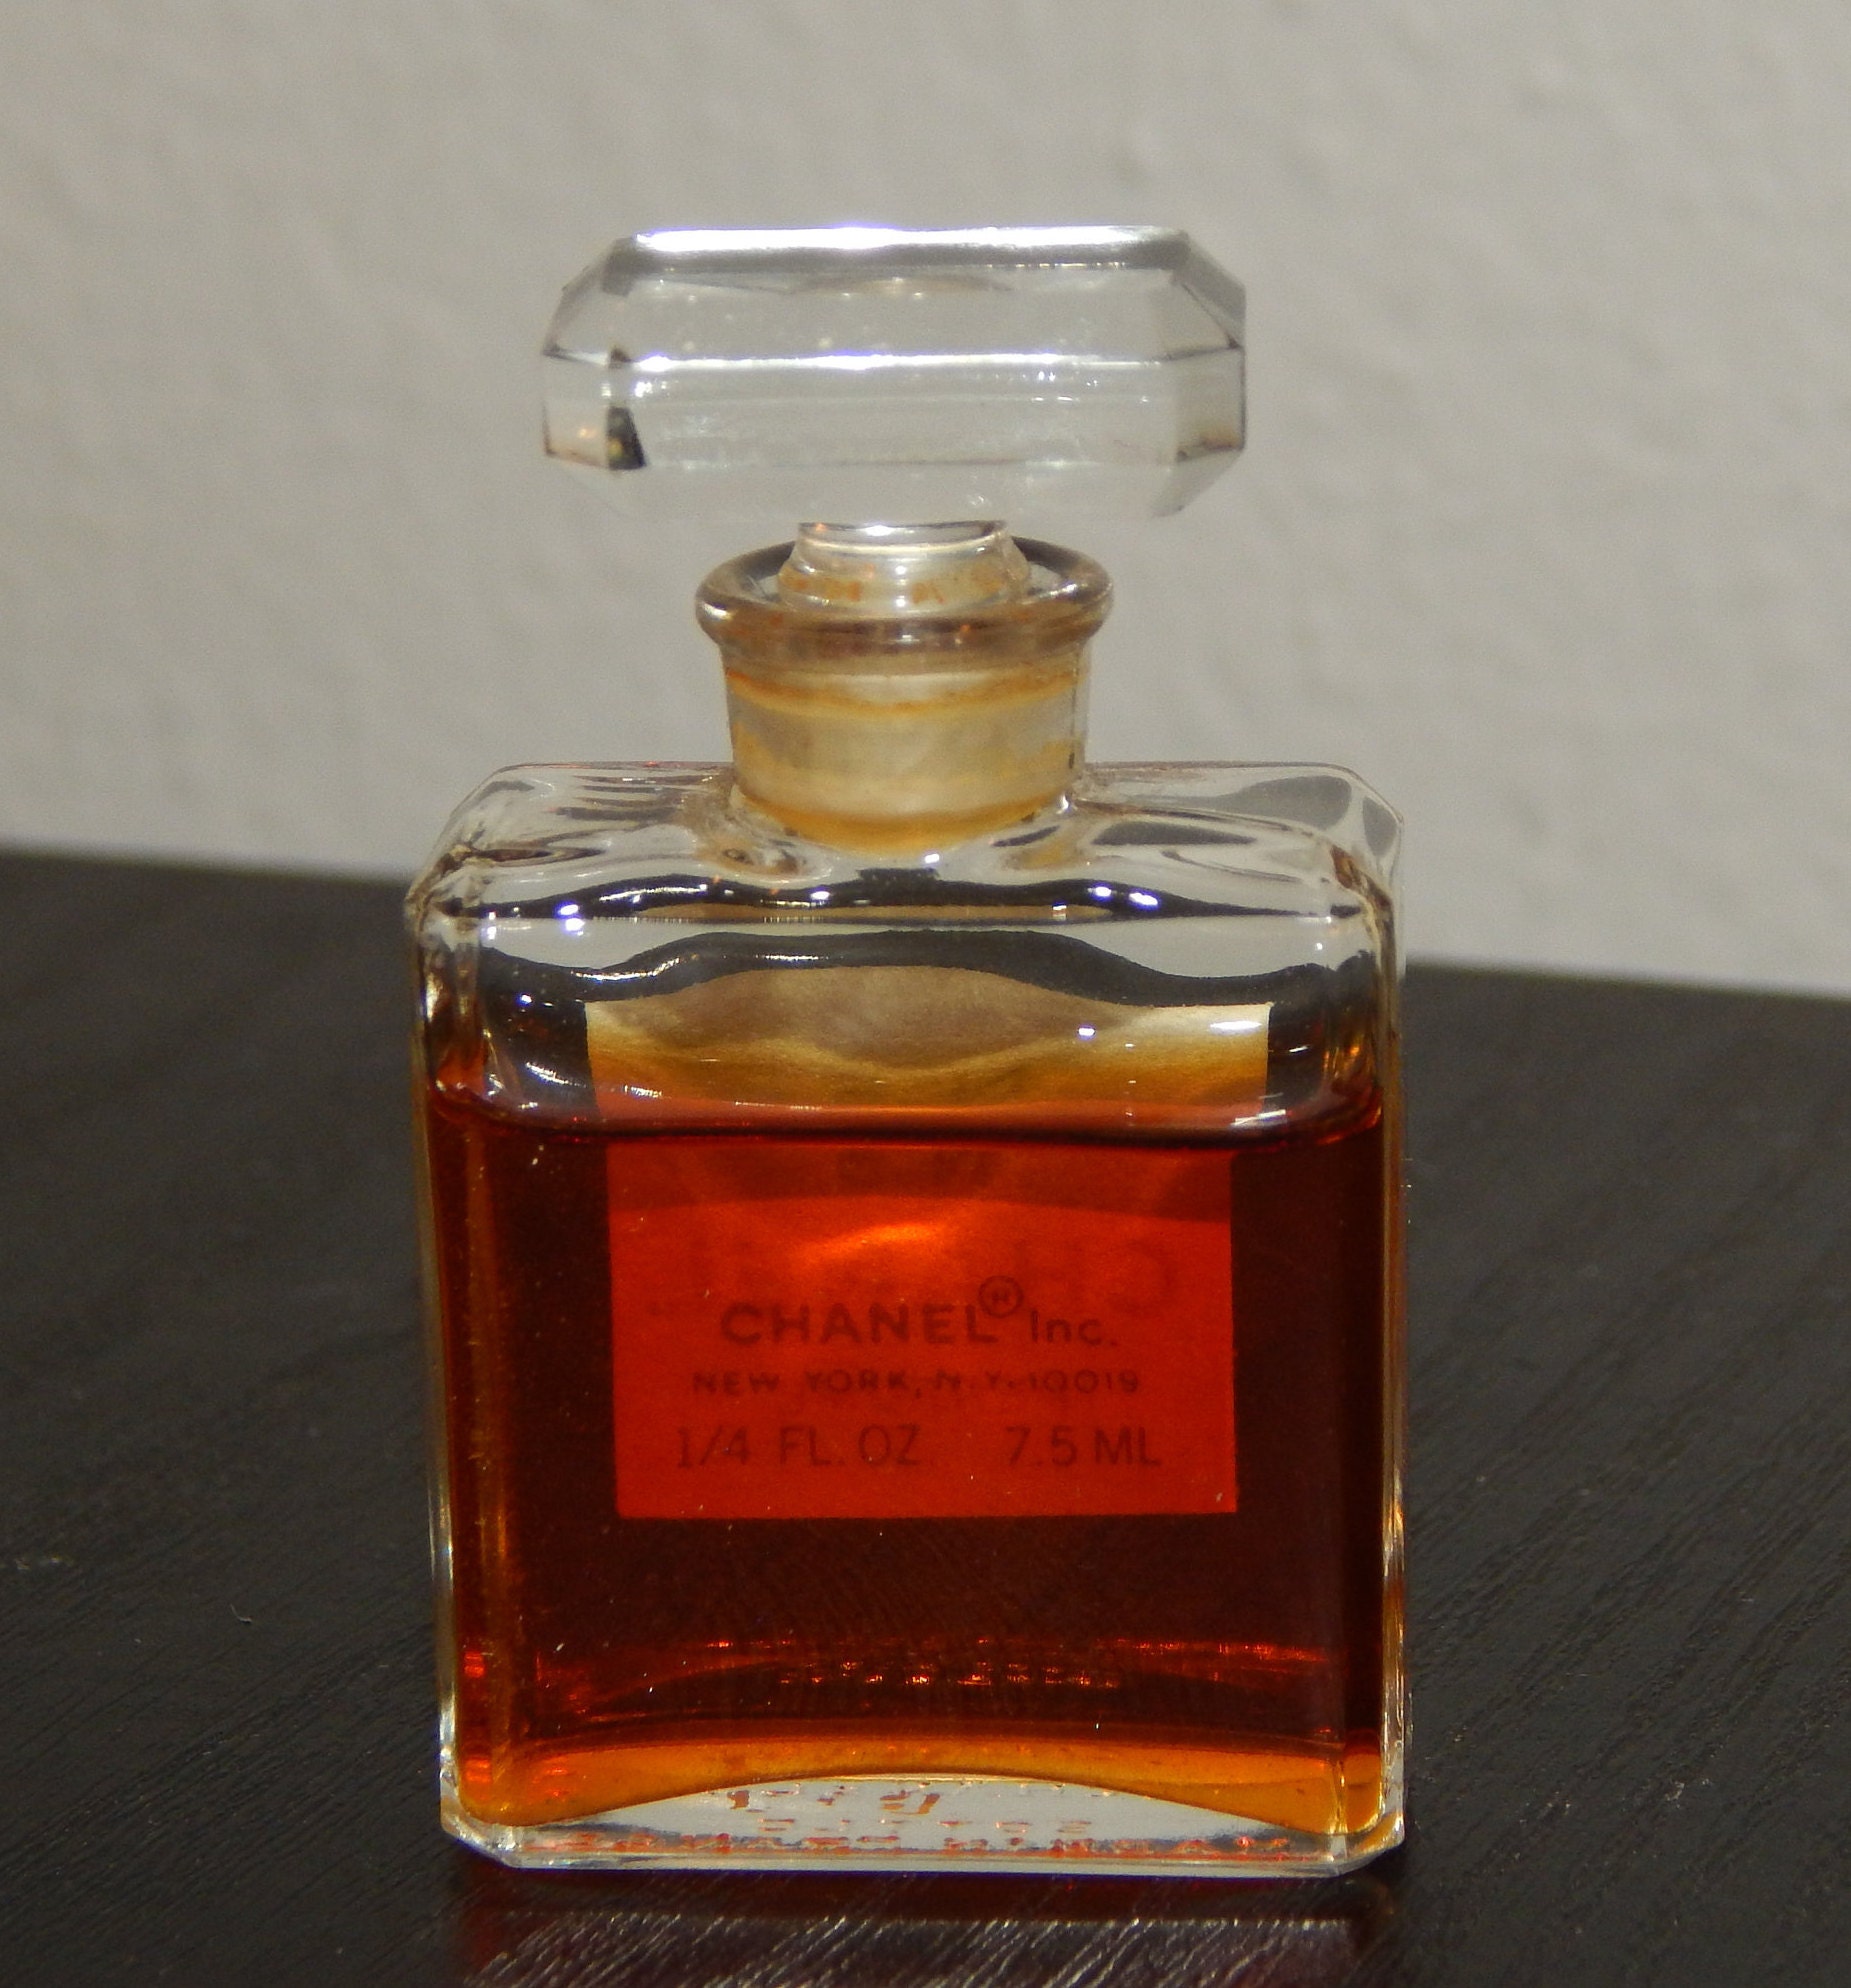 Buy Vintage Chanel No 5 Perfume Bottle Online In India -  India